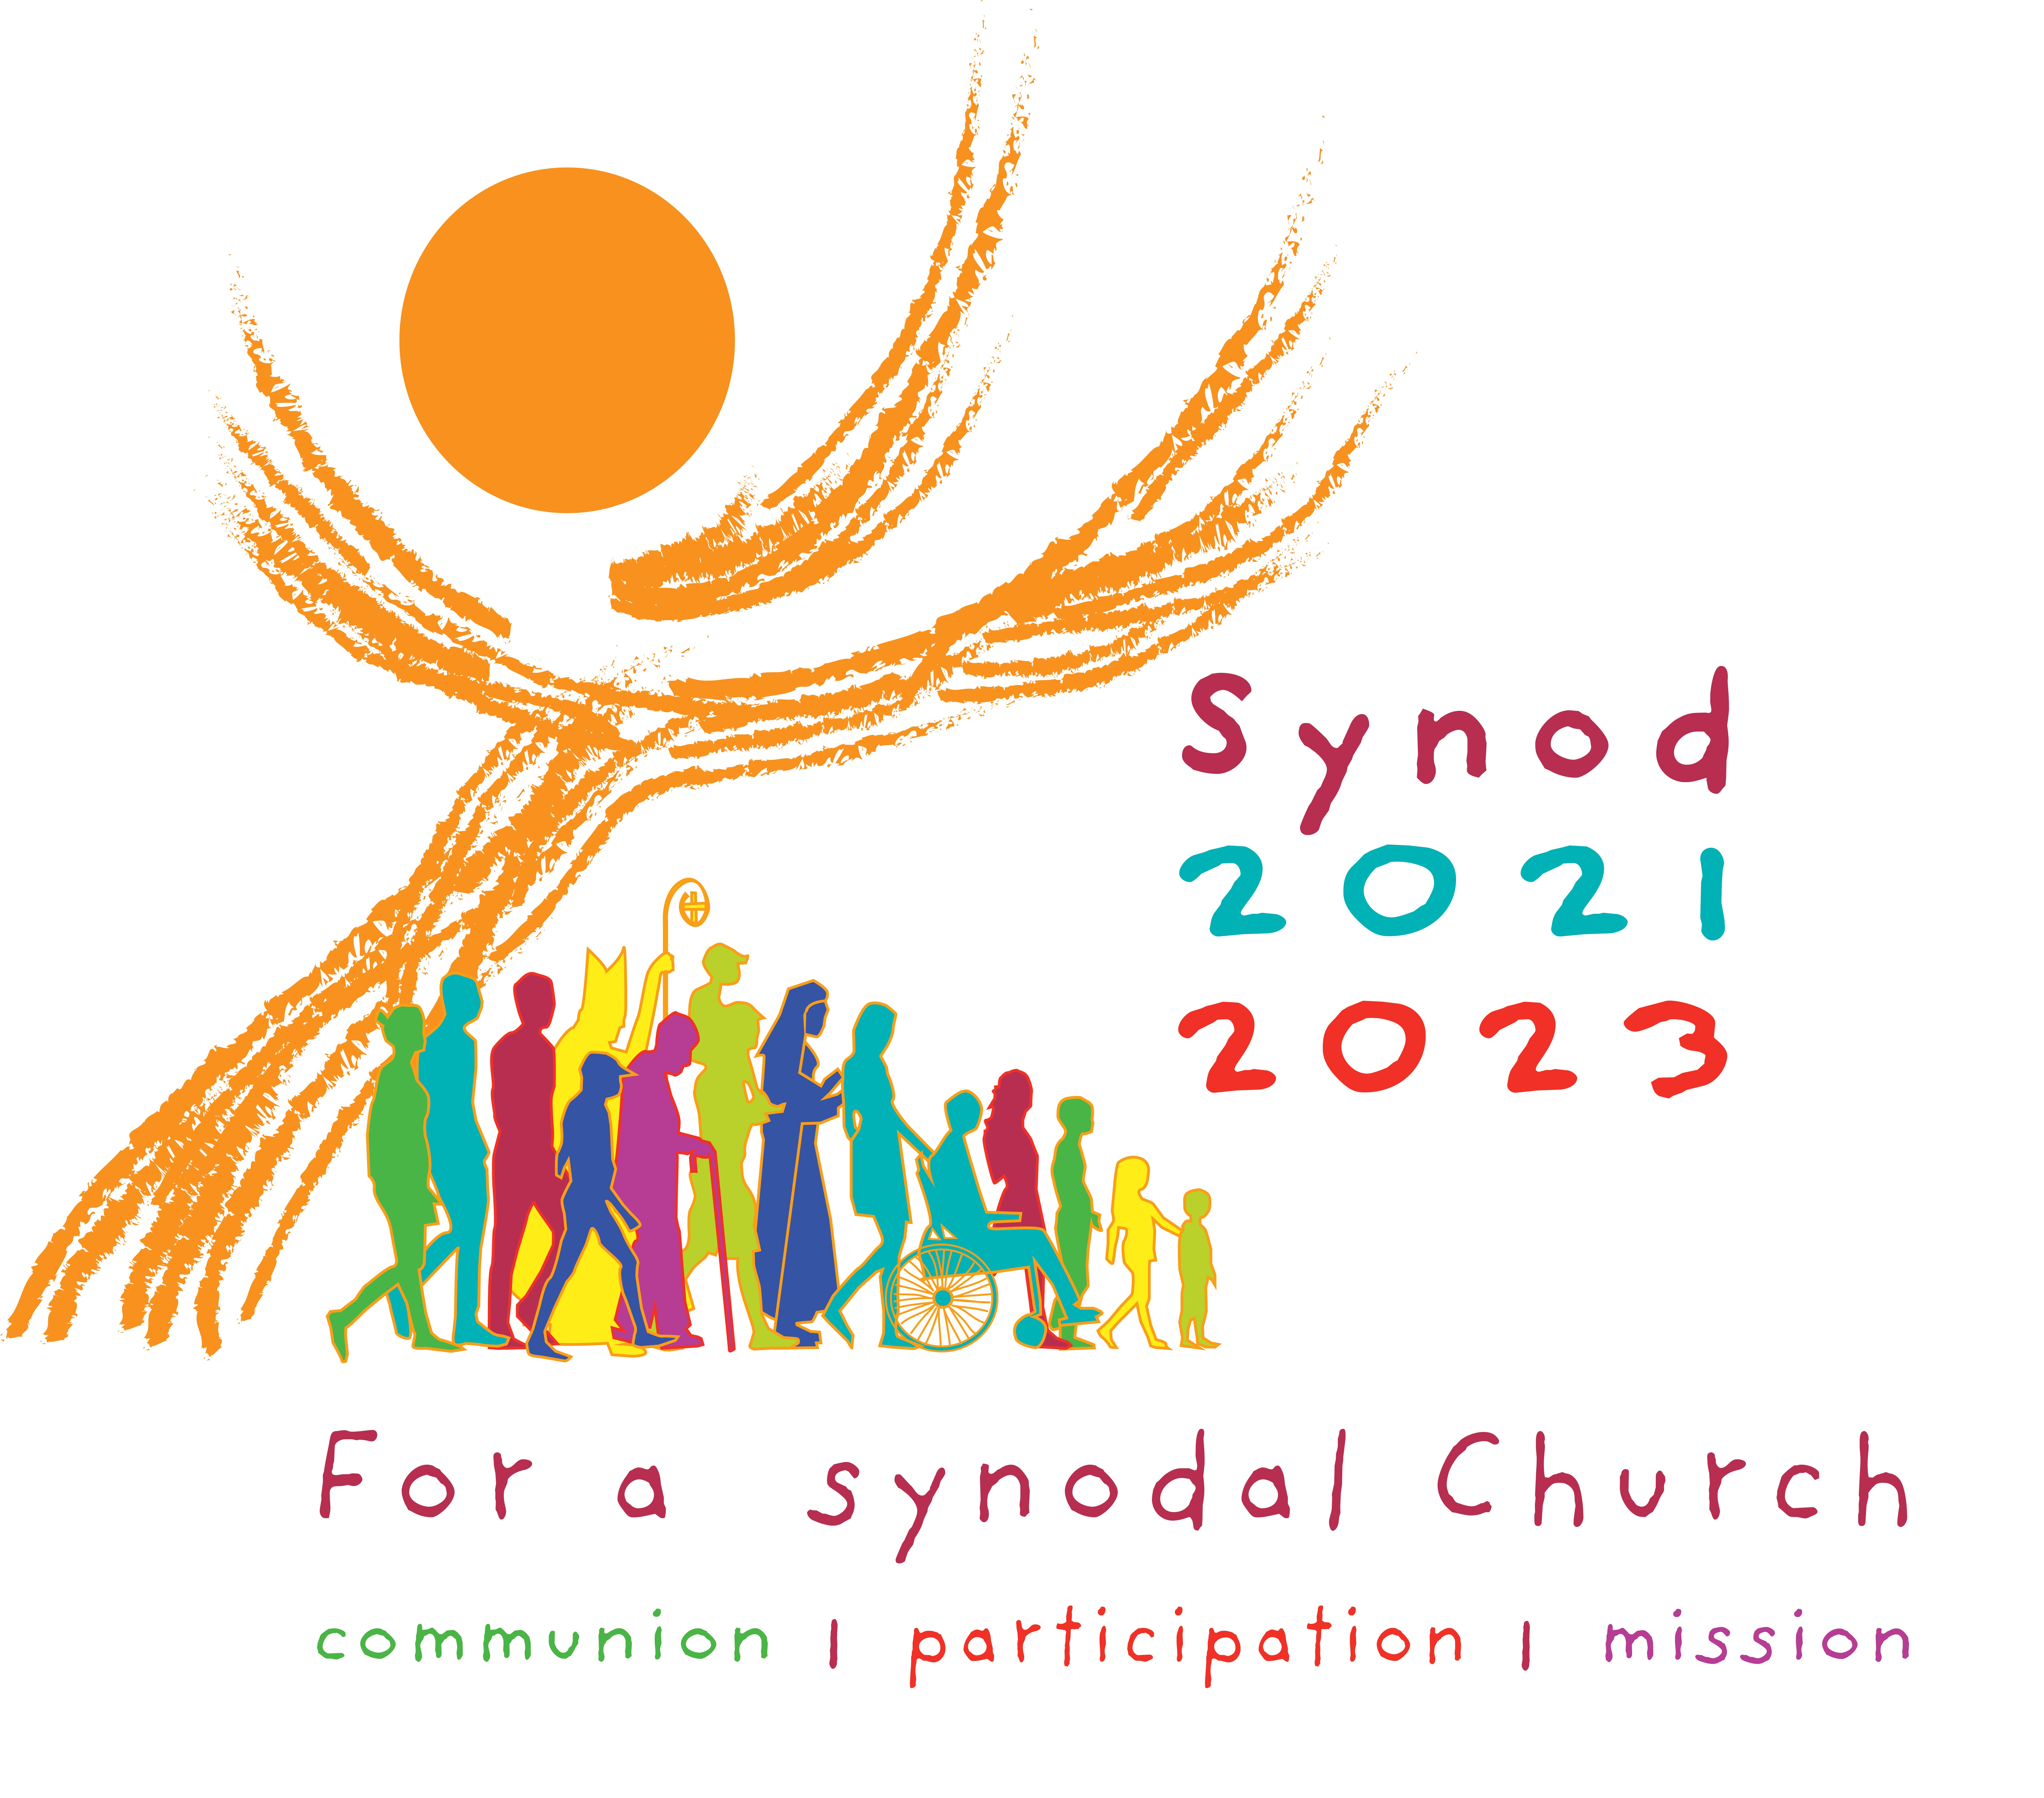 Logo for the Synod 2023 people walking together in community